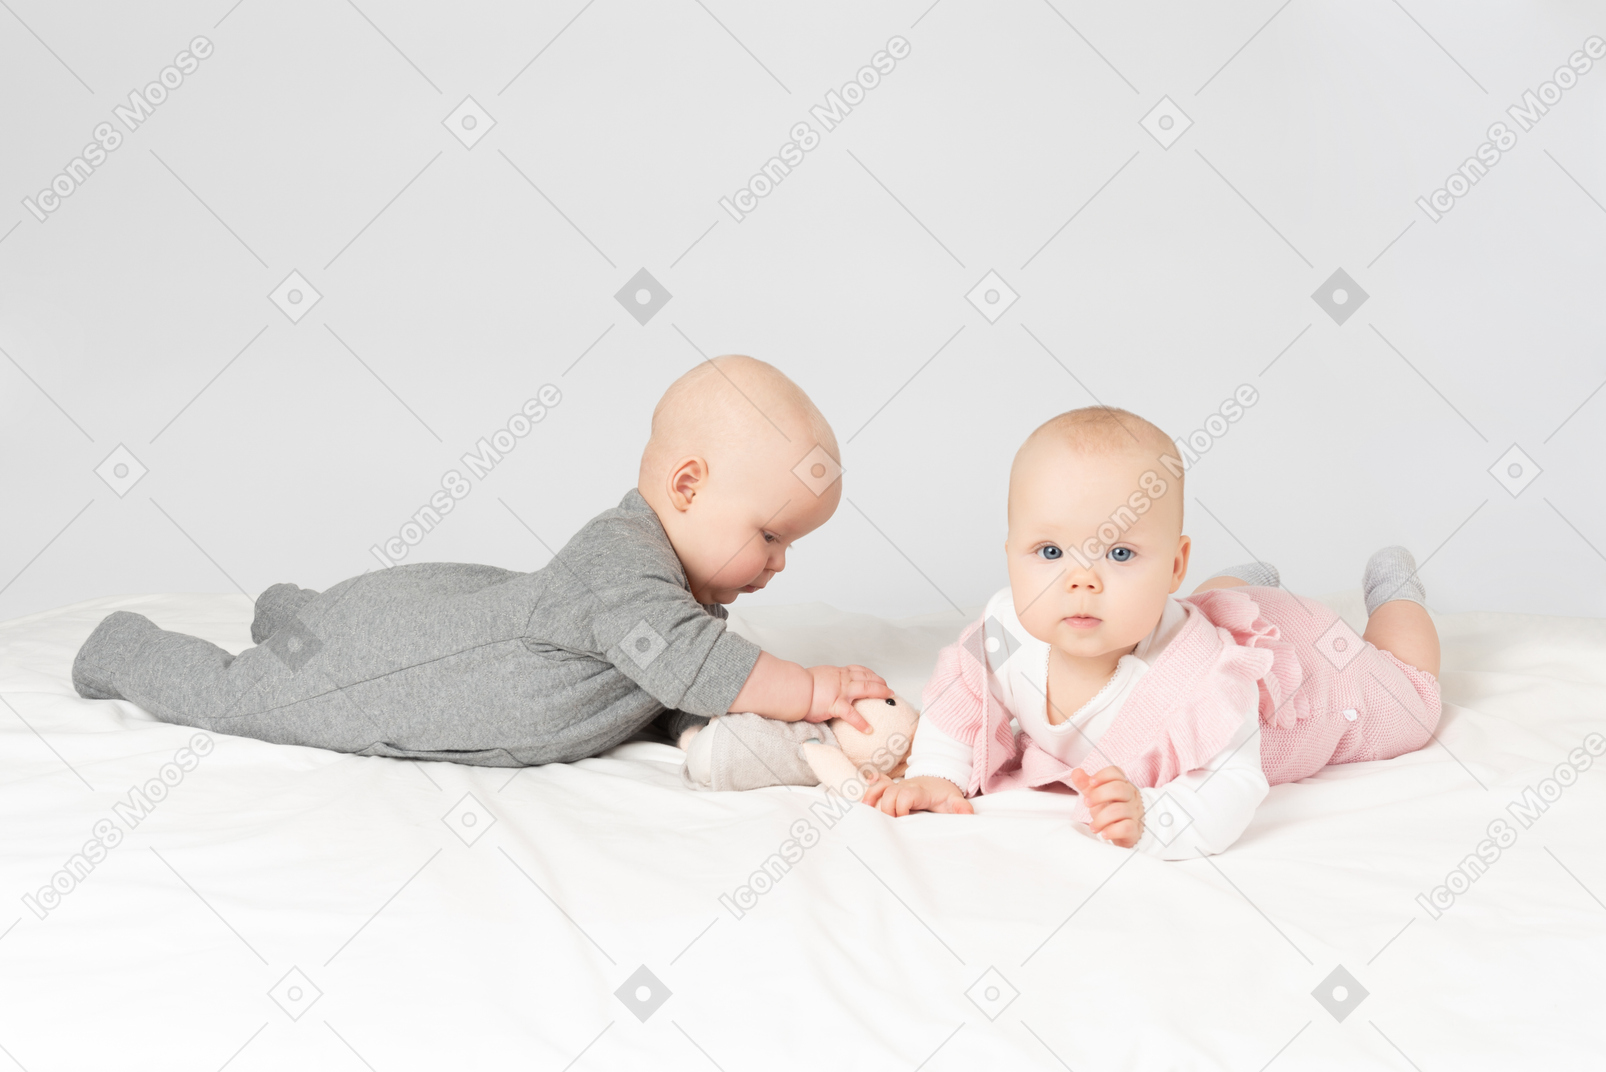 Babies twins lying on the stomach and holding stuffed toy